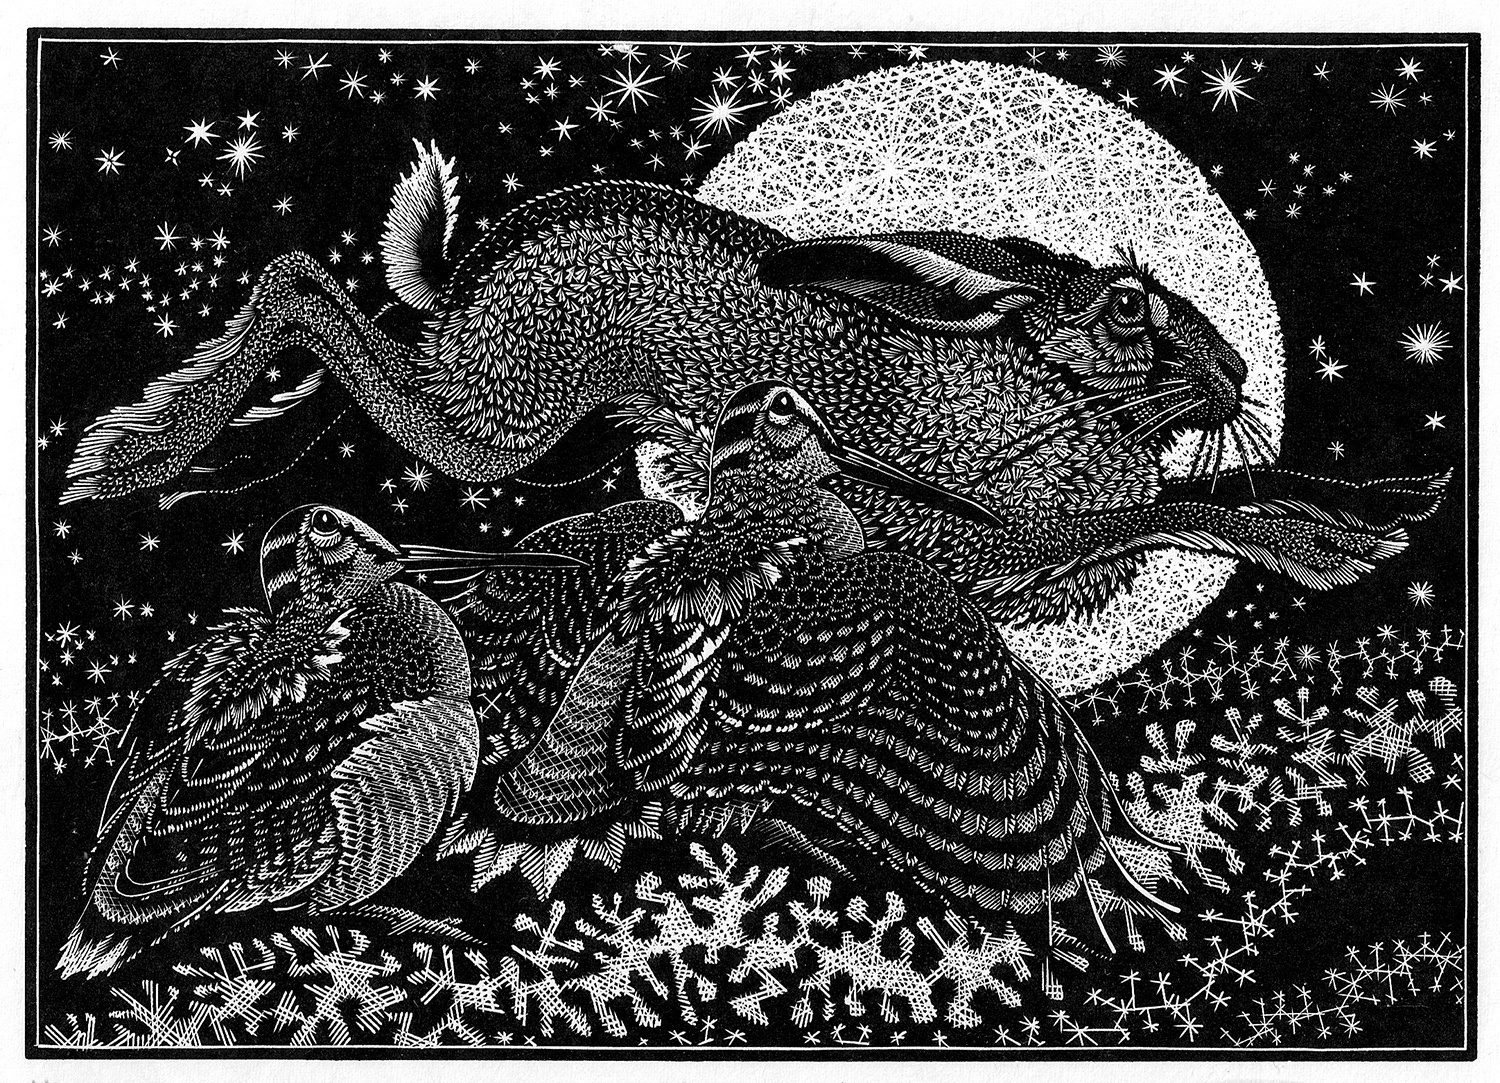 Nocturnal Encounters-Hare and Woodcocks by Colin See-Paynton